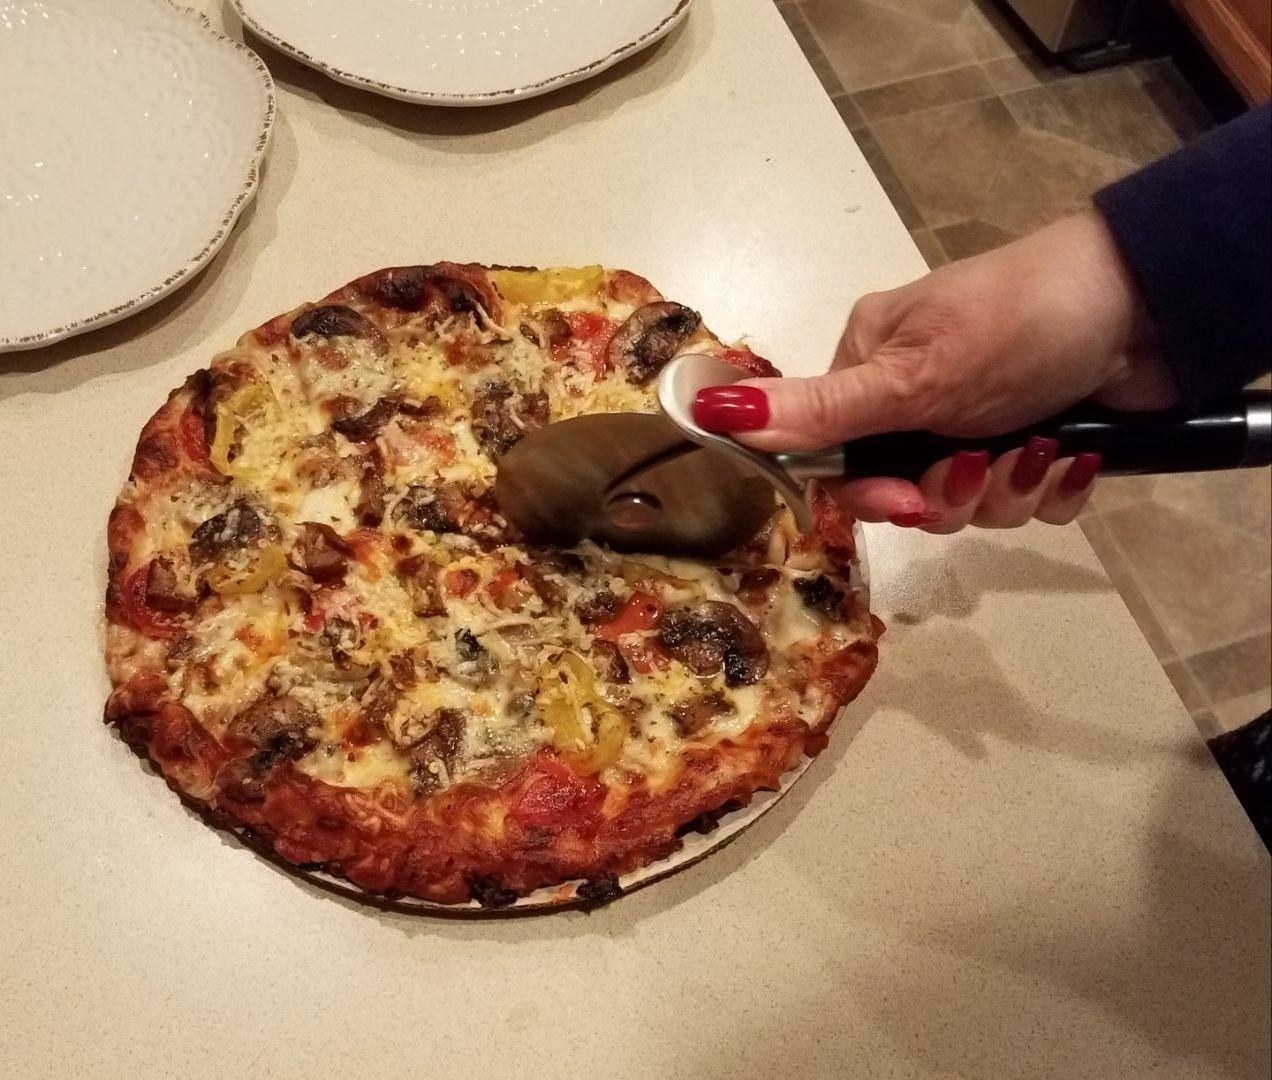 Reviewer slicing pizza with the cutter